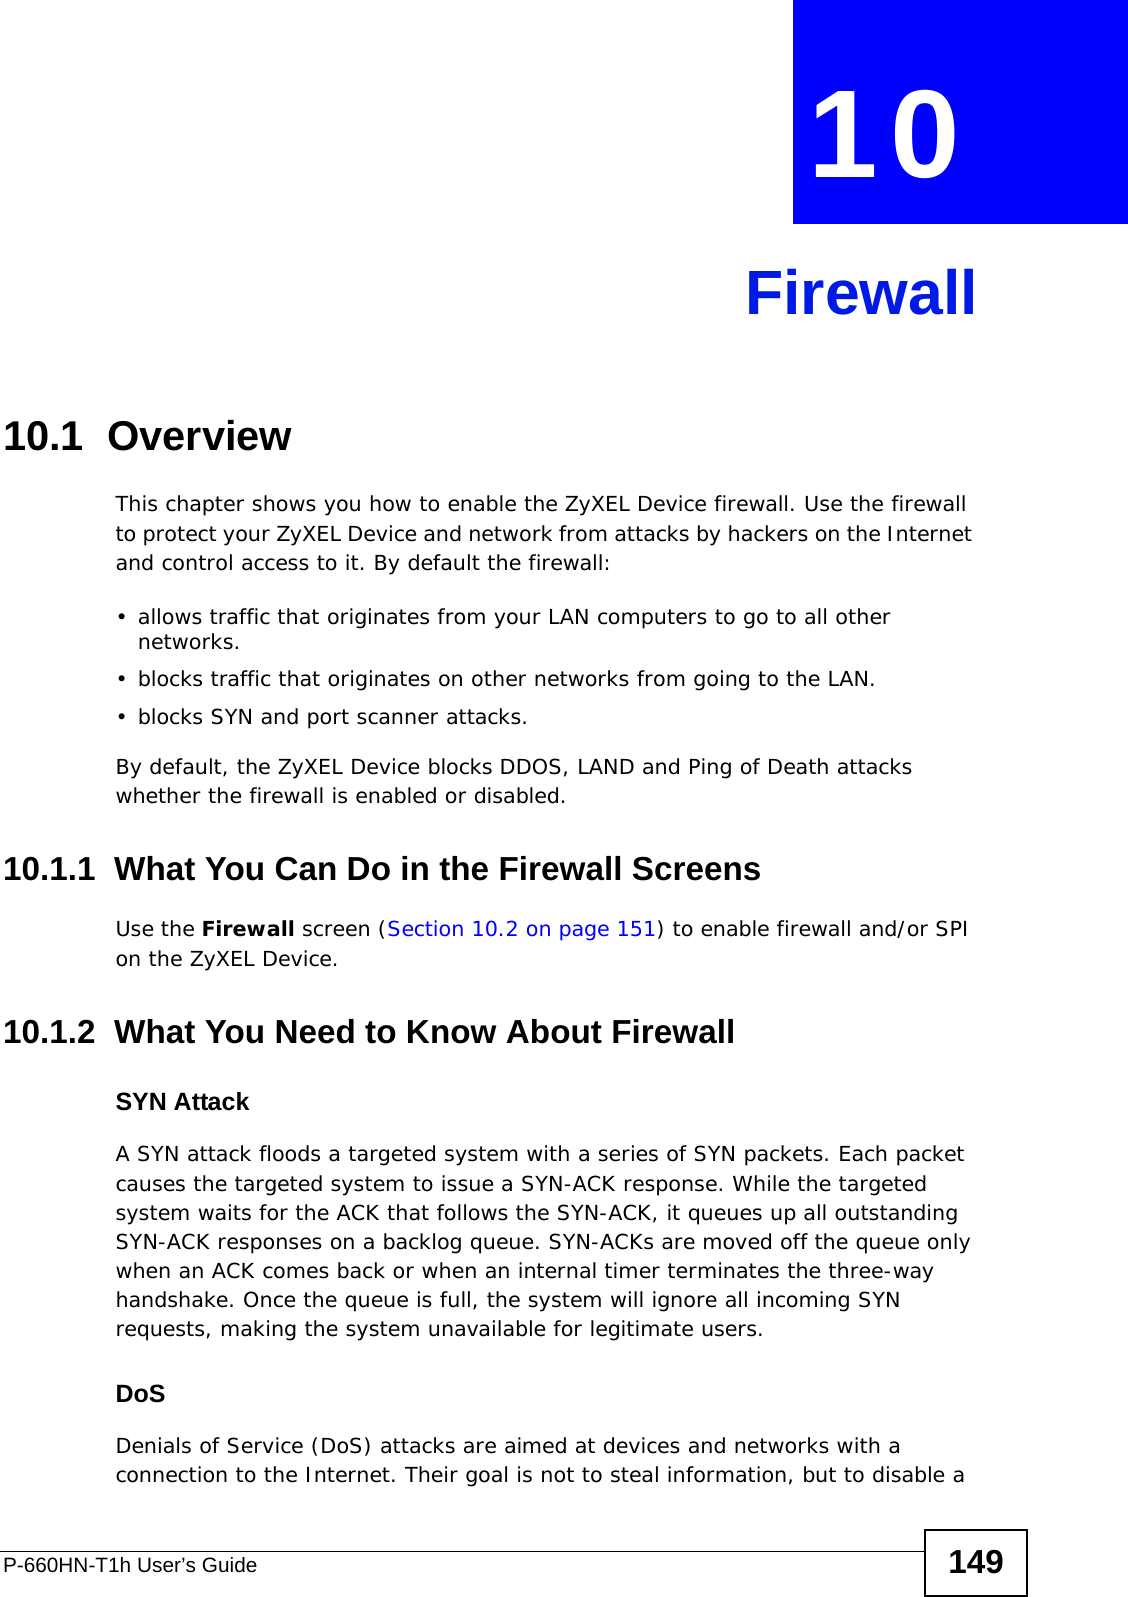 P-660HN-T1h User’s Guide 149CHAPTER  10 Firewall10.1  OverviewThis chapter shows you how to enable the ZyXEL Device firewall. Use the firewall to protect your ZyXEL Device and network from attacks by hackers on the Internet and control access to it. By default the firewall:• allows traffic that originates from your LAN computers to go to all other networks. • blocks traffic that originates on other networks from going to the LAN.• blocks SYN and port scanner attacks.By default, the ZyXEL Device blocks DDOS, LAND and Ping of Death attacks whether the firewall is enabled or disabled.10.1.1  What You Can Do in the Firewall ScreensUse the Firewall screen (Section 10.2 on page 151) to enable firewall and/or SPI on the ZyXEL Device.10.1.2  What You Need to Know About FirewallSYN AttackA SYN attack floods a targeted system with a series of SYN packets. Each packet causes the targeted system to issue a SYN-ACK response. While the targeted system waits for the ACK that follows the SYN-ACK, it queues up all outstanding SYN-ACK responses on a backlog queue. SYN-ACKs are moved off the queue only when an ACK comes back or when an internal timer terminates the three-way handshake. Once the queue is full, the system will ignore all incoming SYN requests, making the system unavailable for legitimate users.DoSDenials of Service (DoS) attacks are aimed at devices and networks with a connection to the Internet. Their goal is not to steal information, but to disable a 